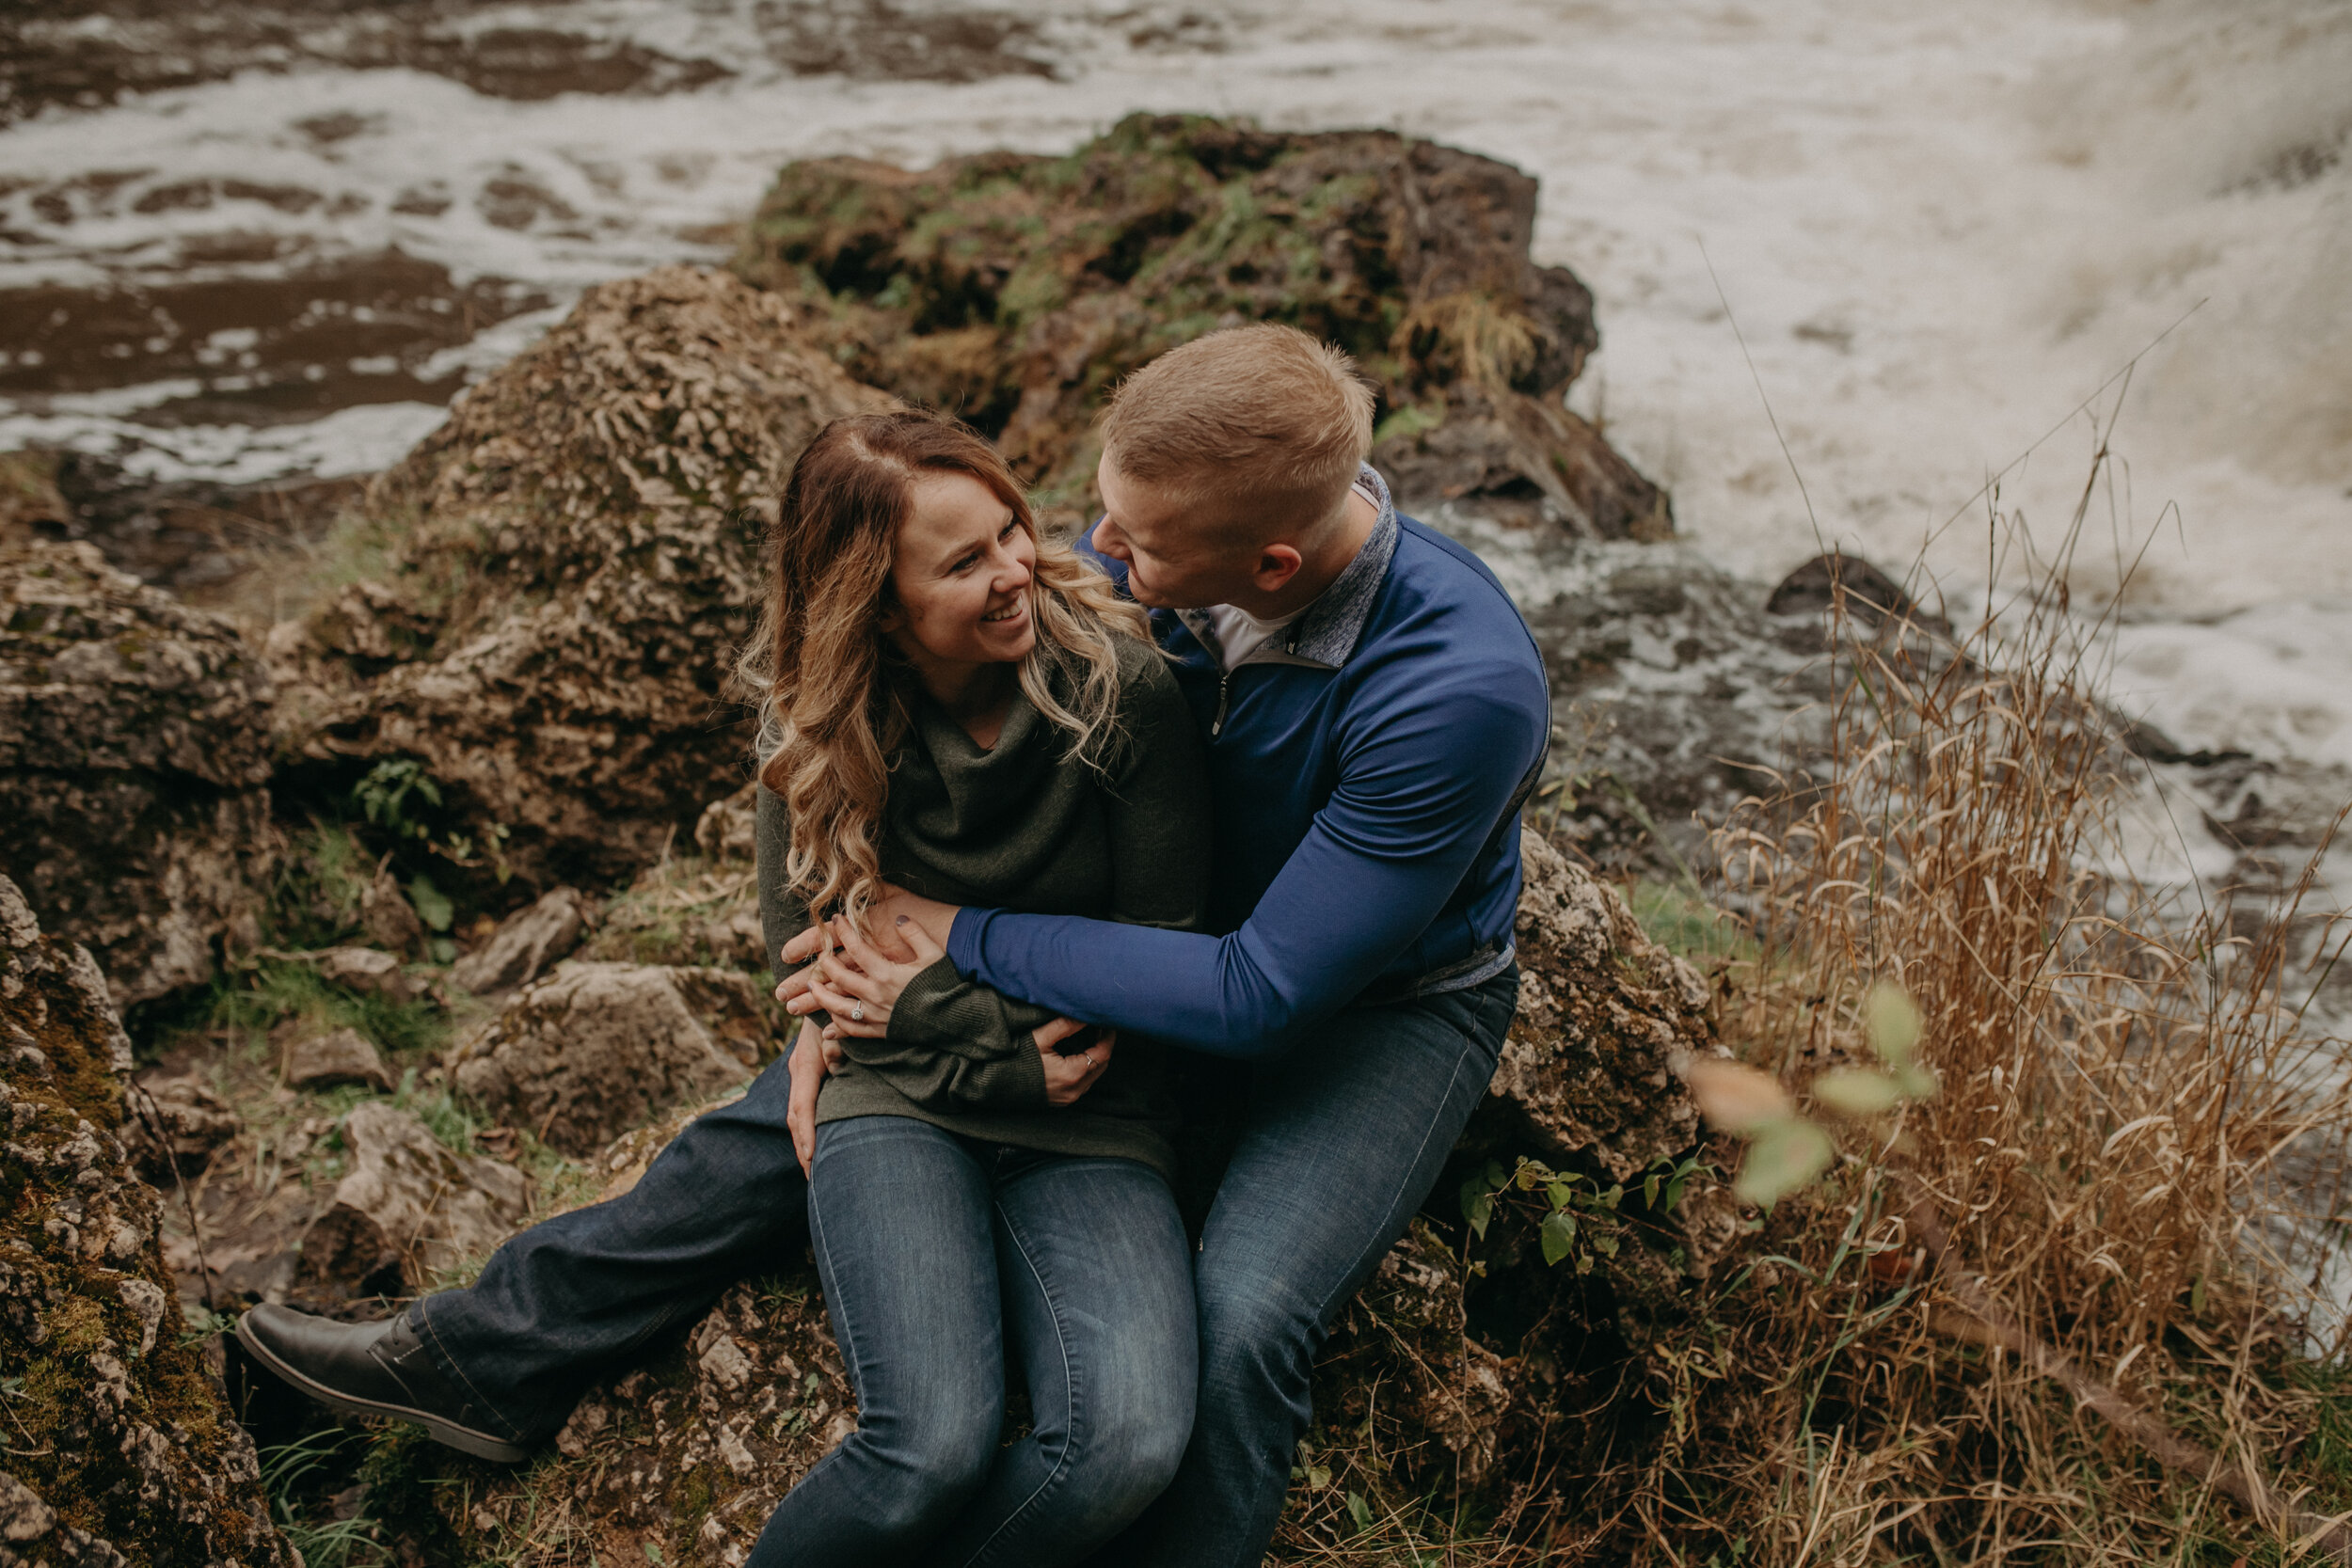  Willow River State Park Engagement Session. Hudson, Wisconsin. Fall Engagement Session. Couple Photos. Adventurous Couple. Adventurous Engagement Session. Wedding Photographer. Engagement Photographer. 